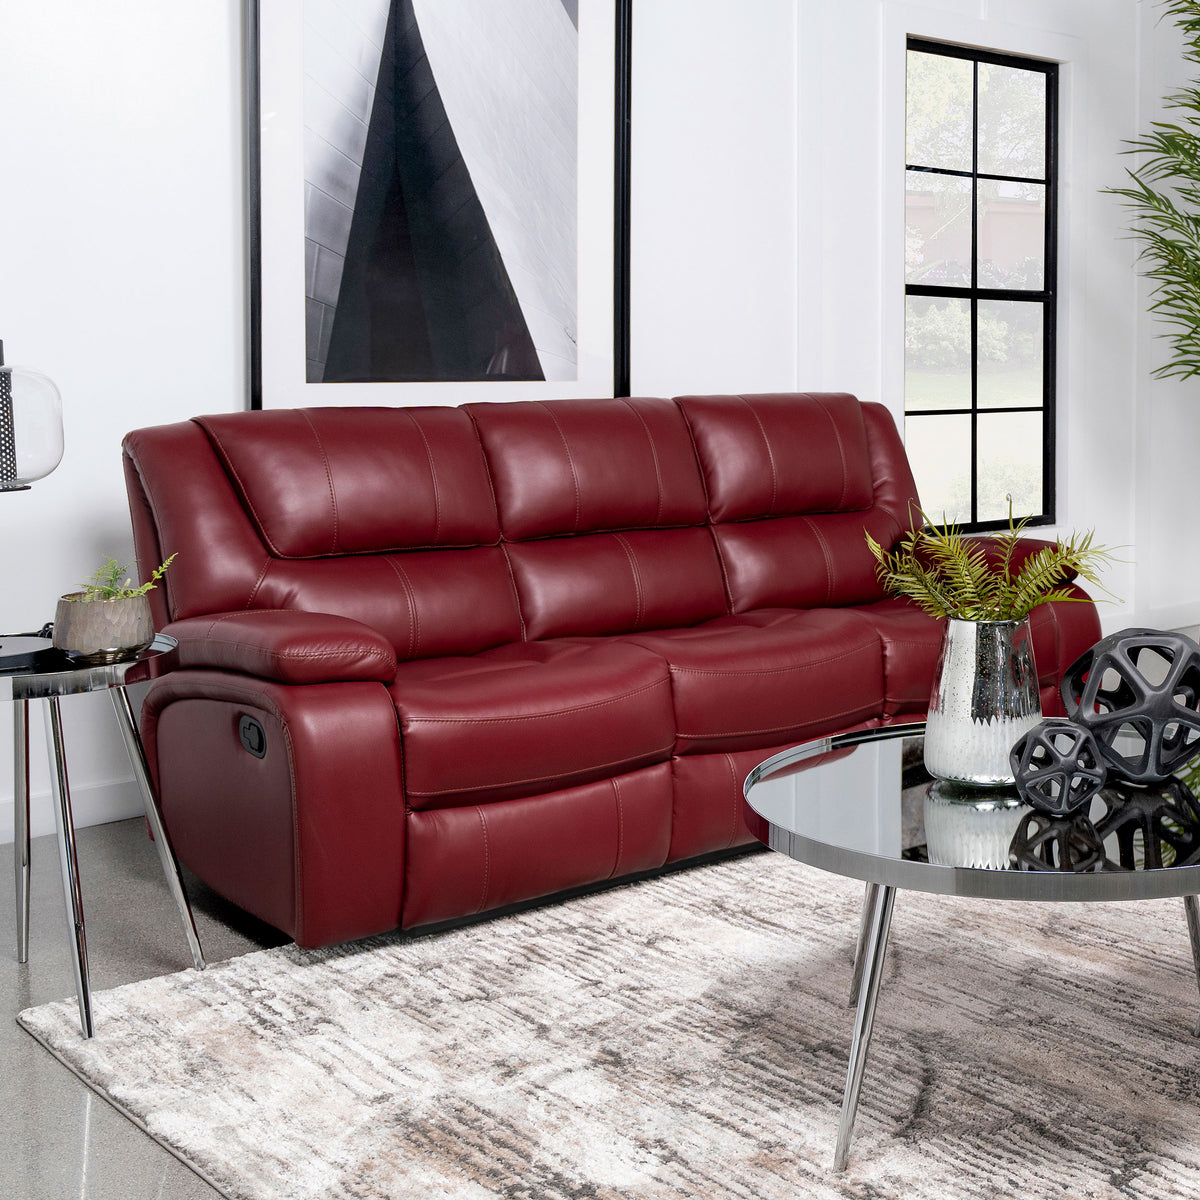 Camila Upholstered Motion Reclining Sofa Red Faux Leather  Las Vegas Furniture Stores